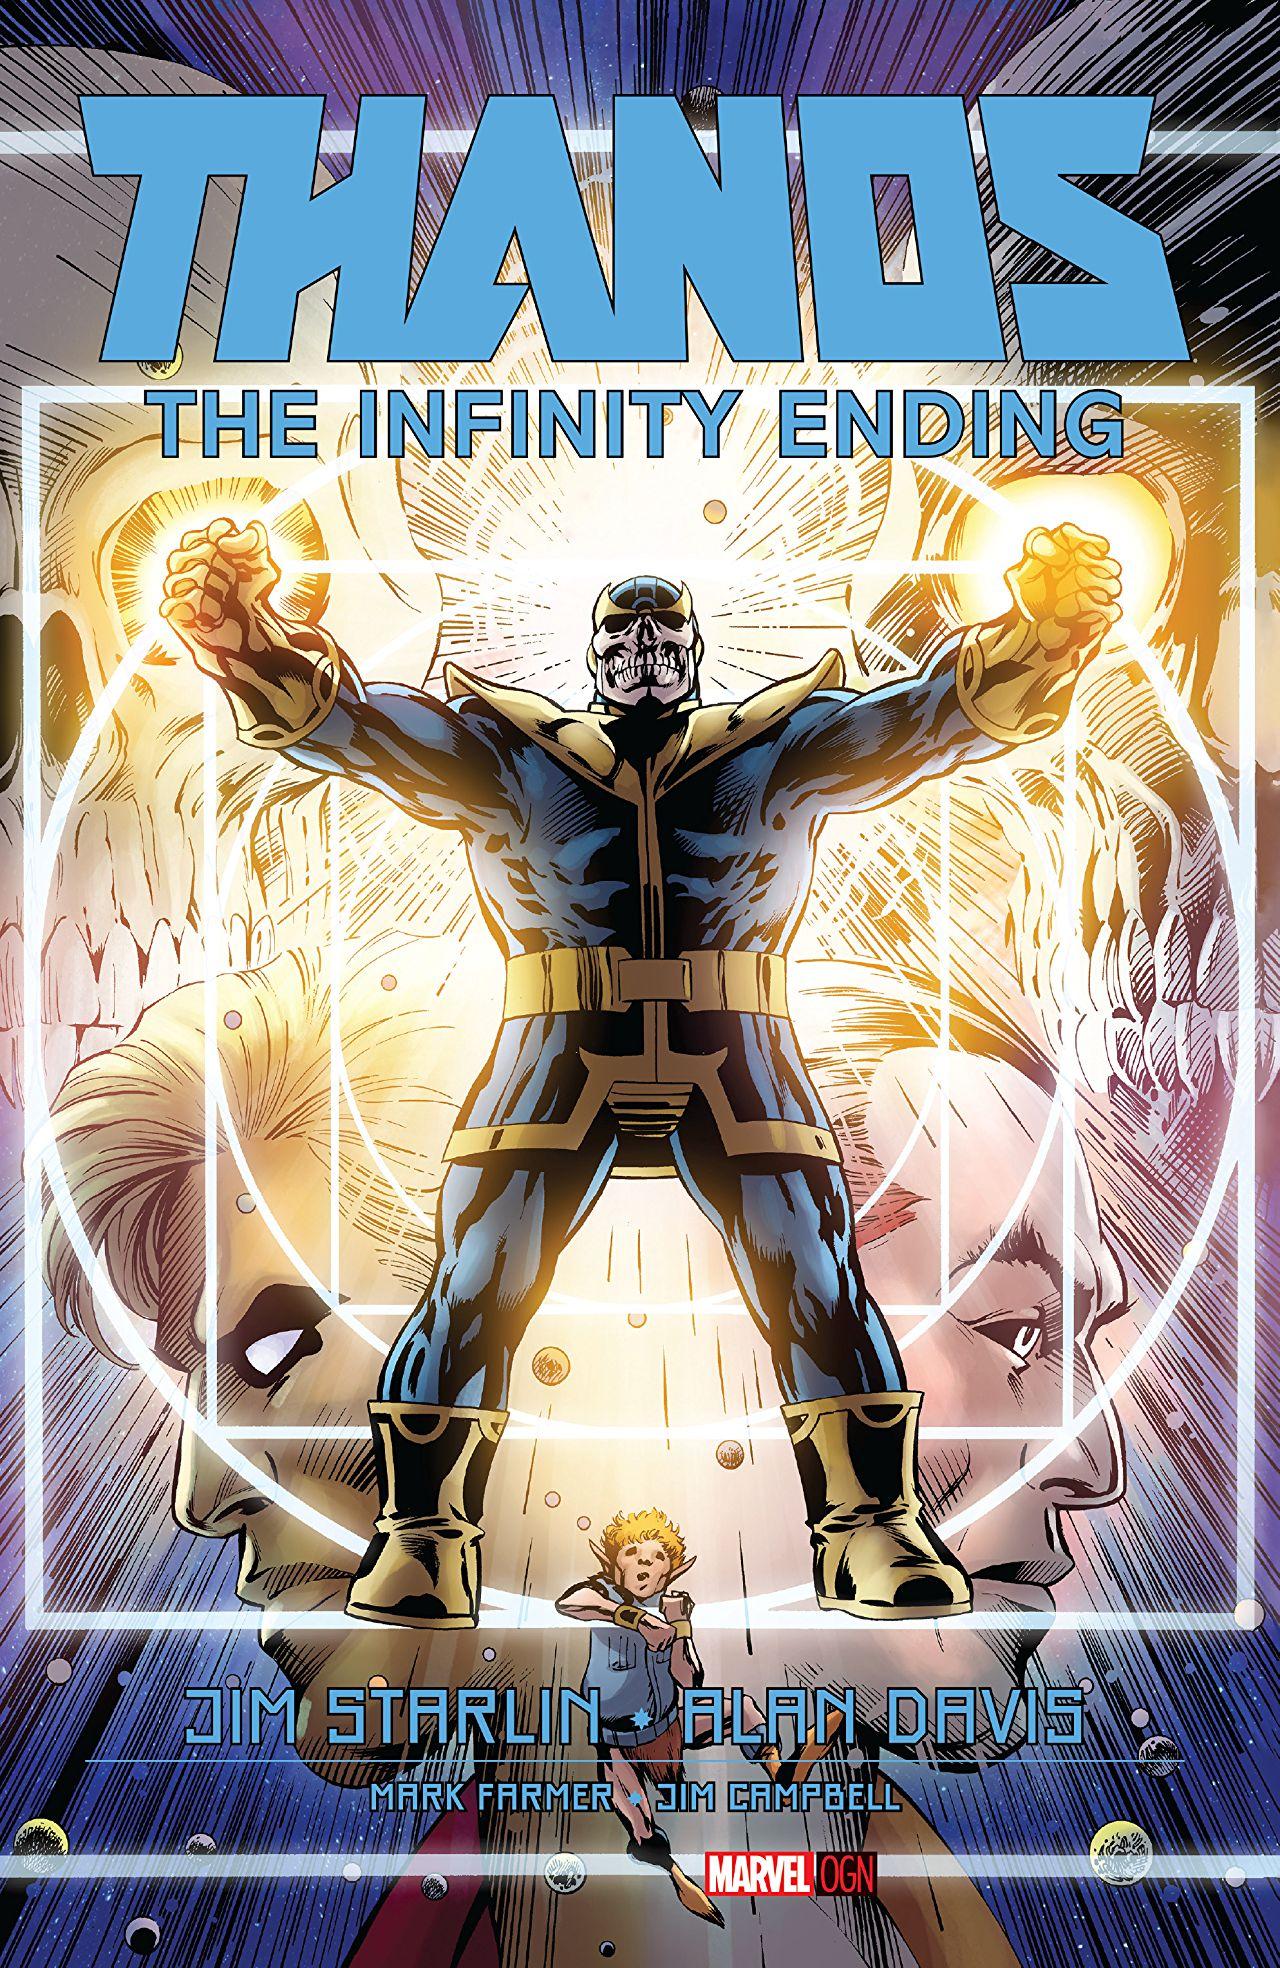 Thanos: The Infinity Ending Vol. 1 #1